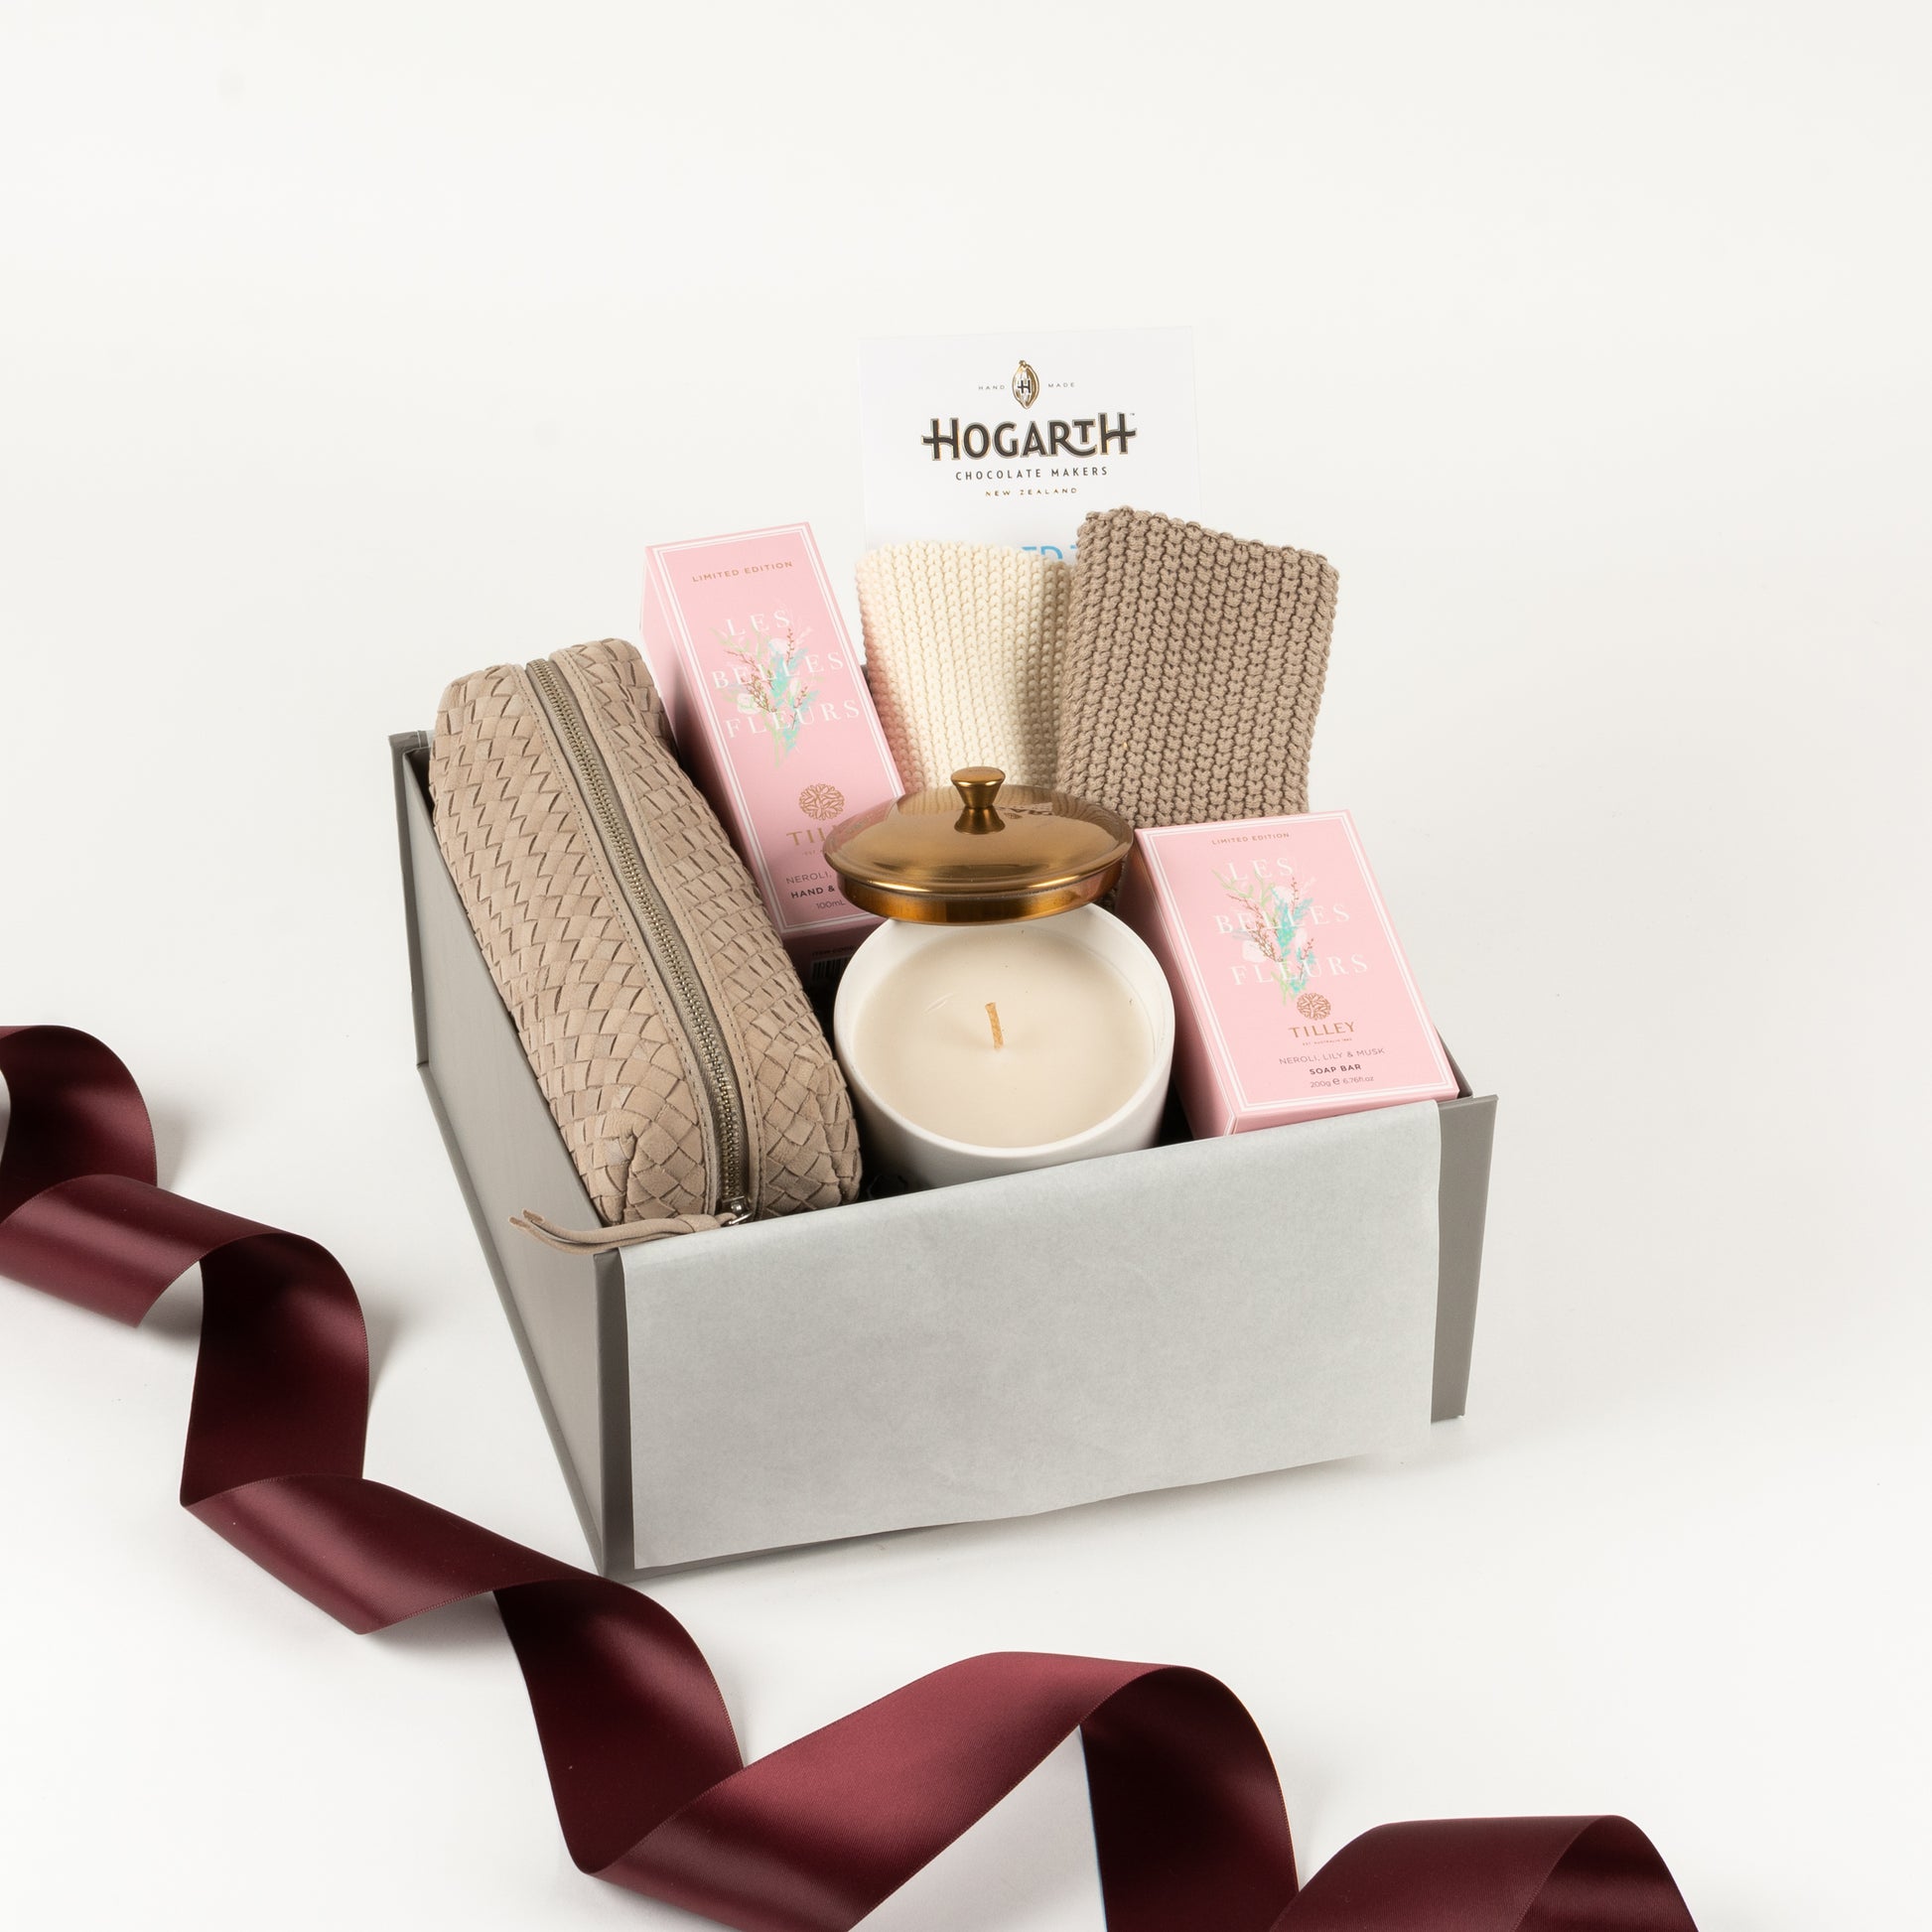 La Belle - Gift Boxes NZ - Gifts of Distinction.  This gift box includes soap and hand cream by Tilley, hygge candle, craft chocolate tablet by Hogarth,a set of cotton washers and a woven leather pencil or makeup pouch.  